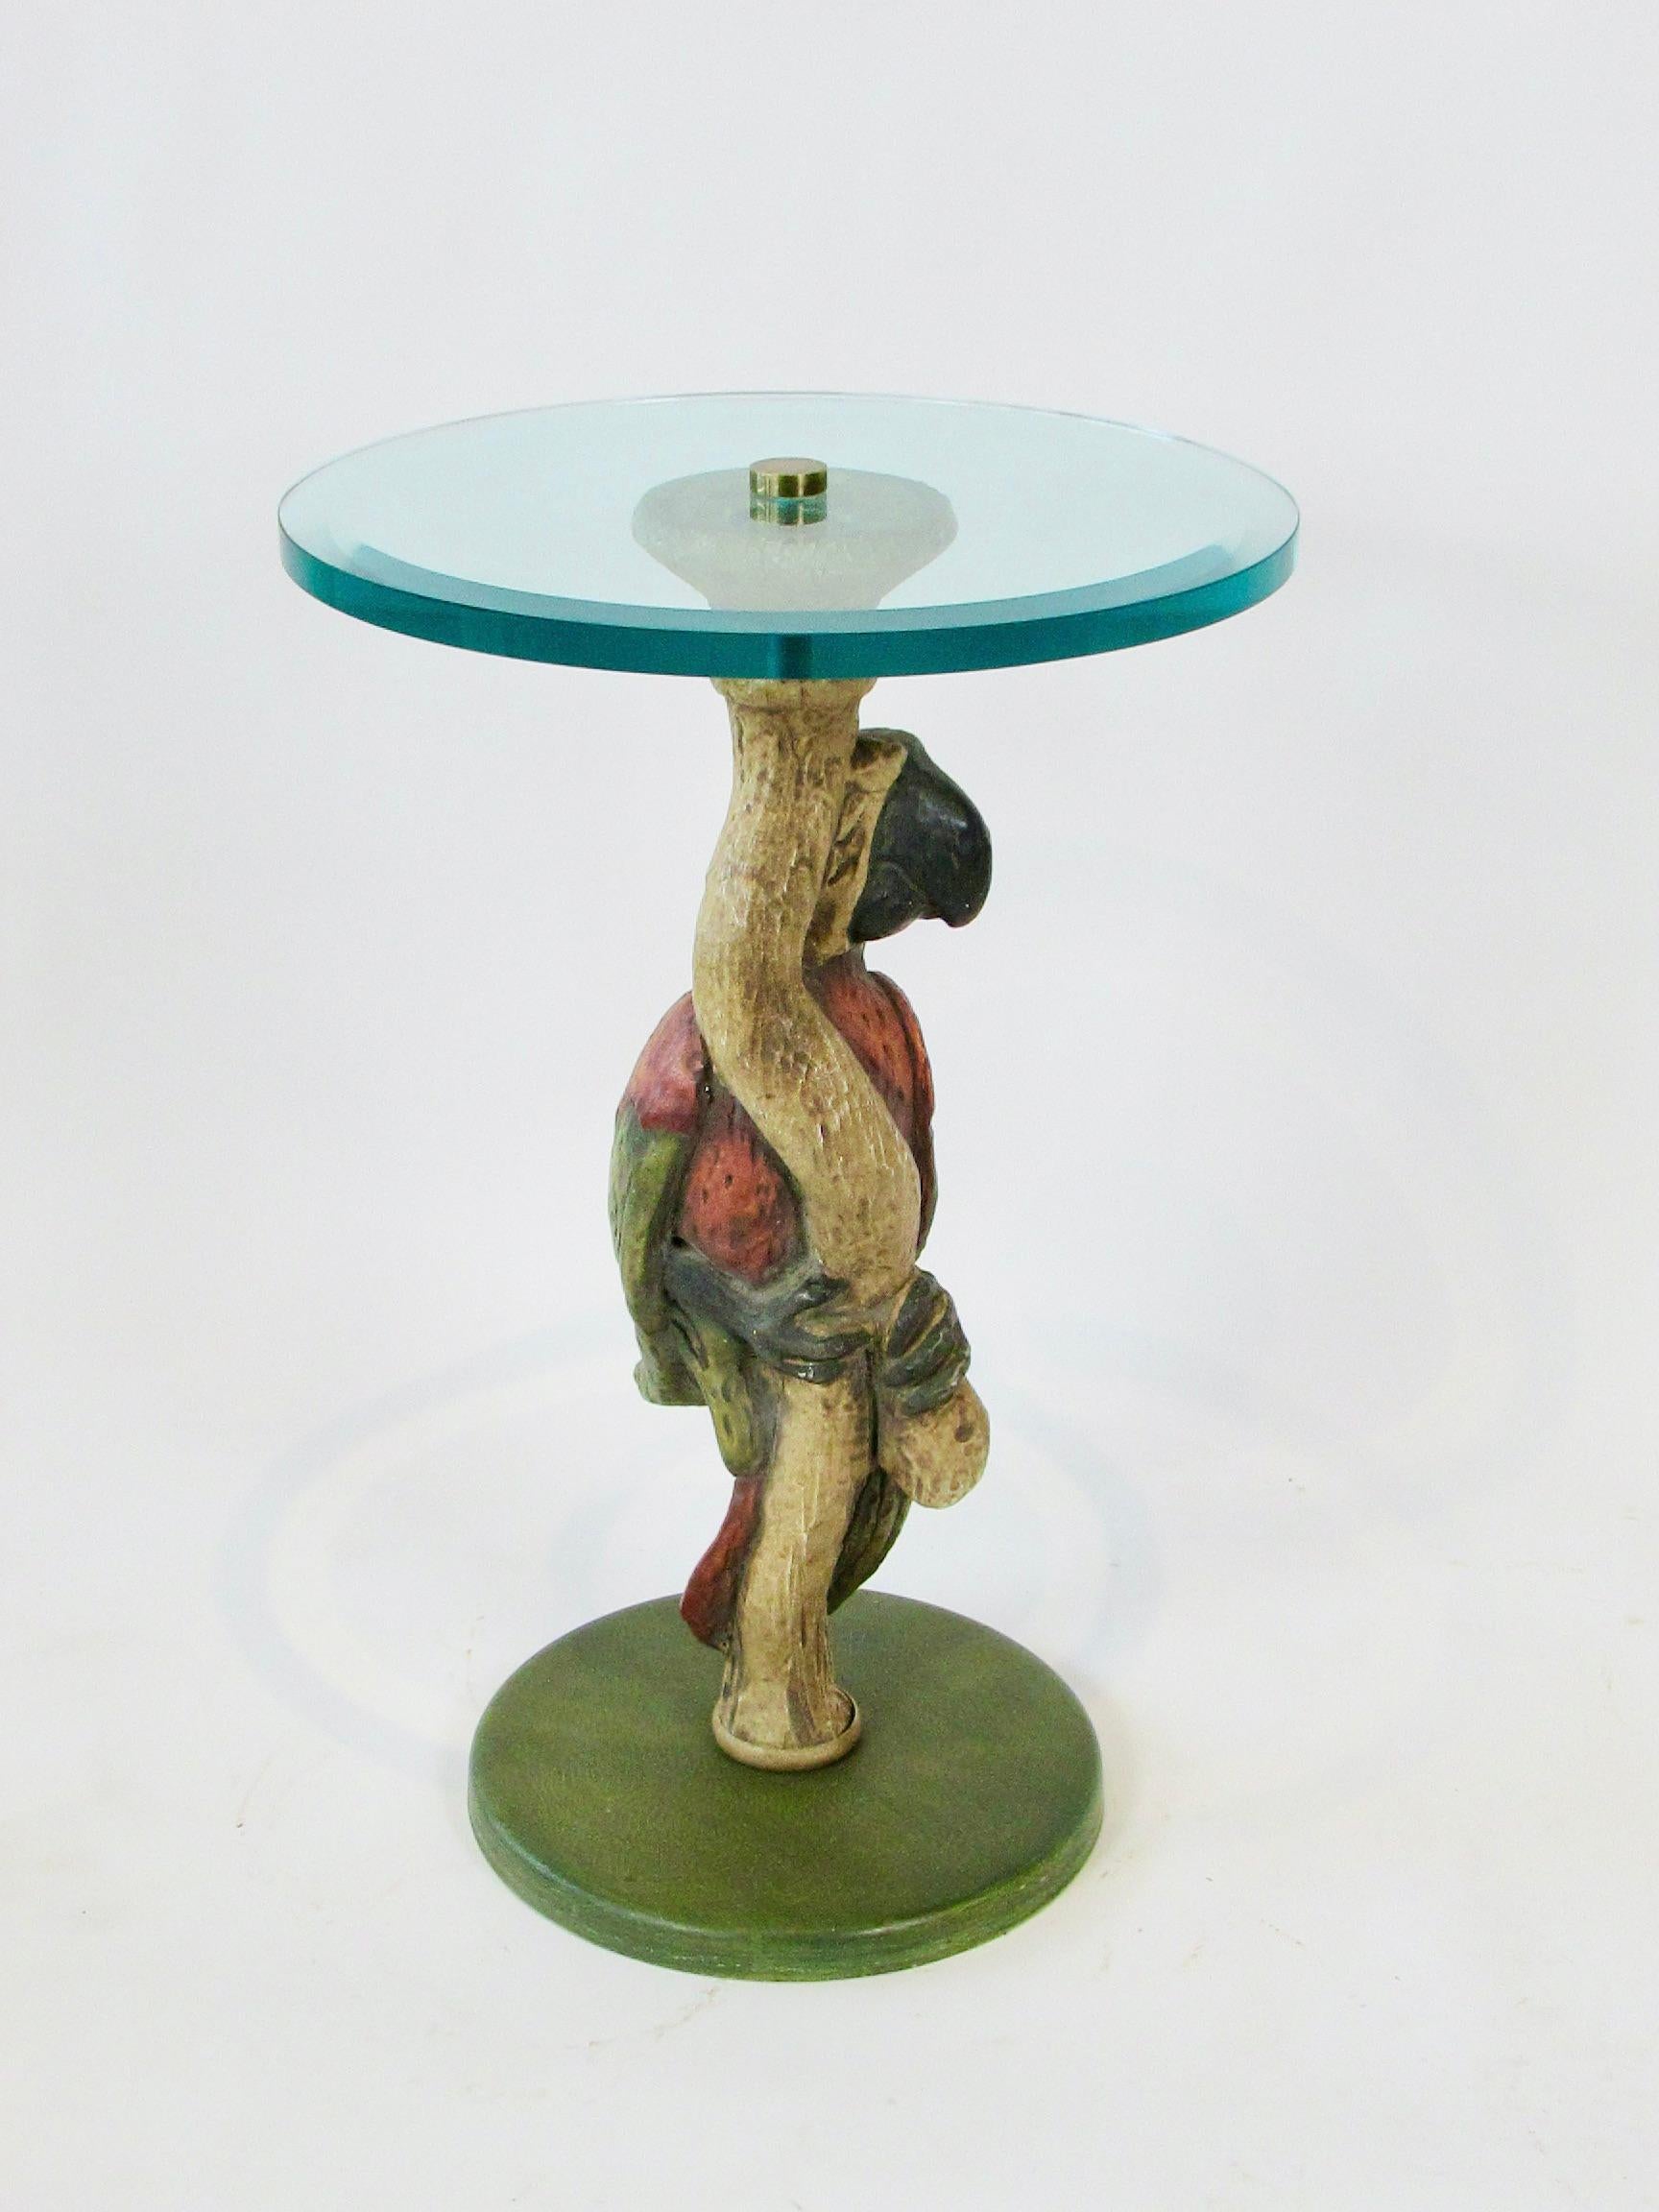 Whimsical Polly Want a Table Bevel Glass on Parrot Base Style of Maitland Smith For Sale 2